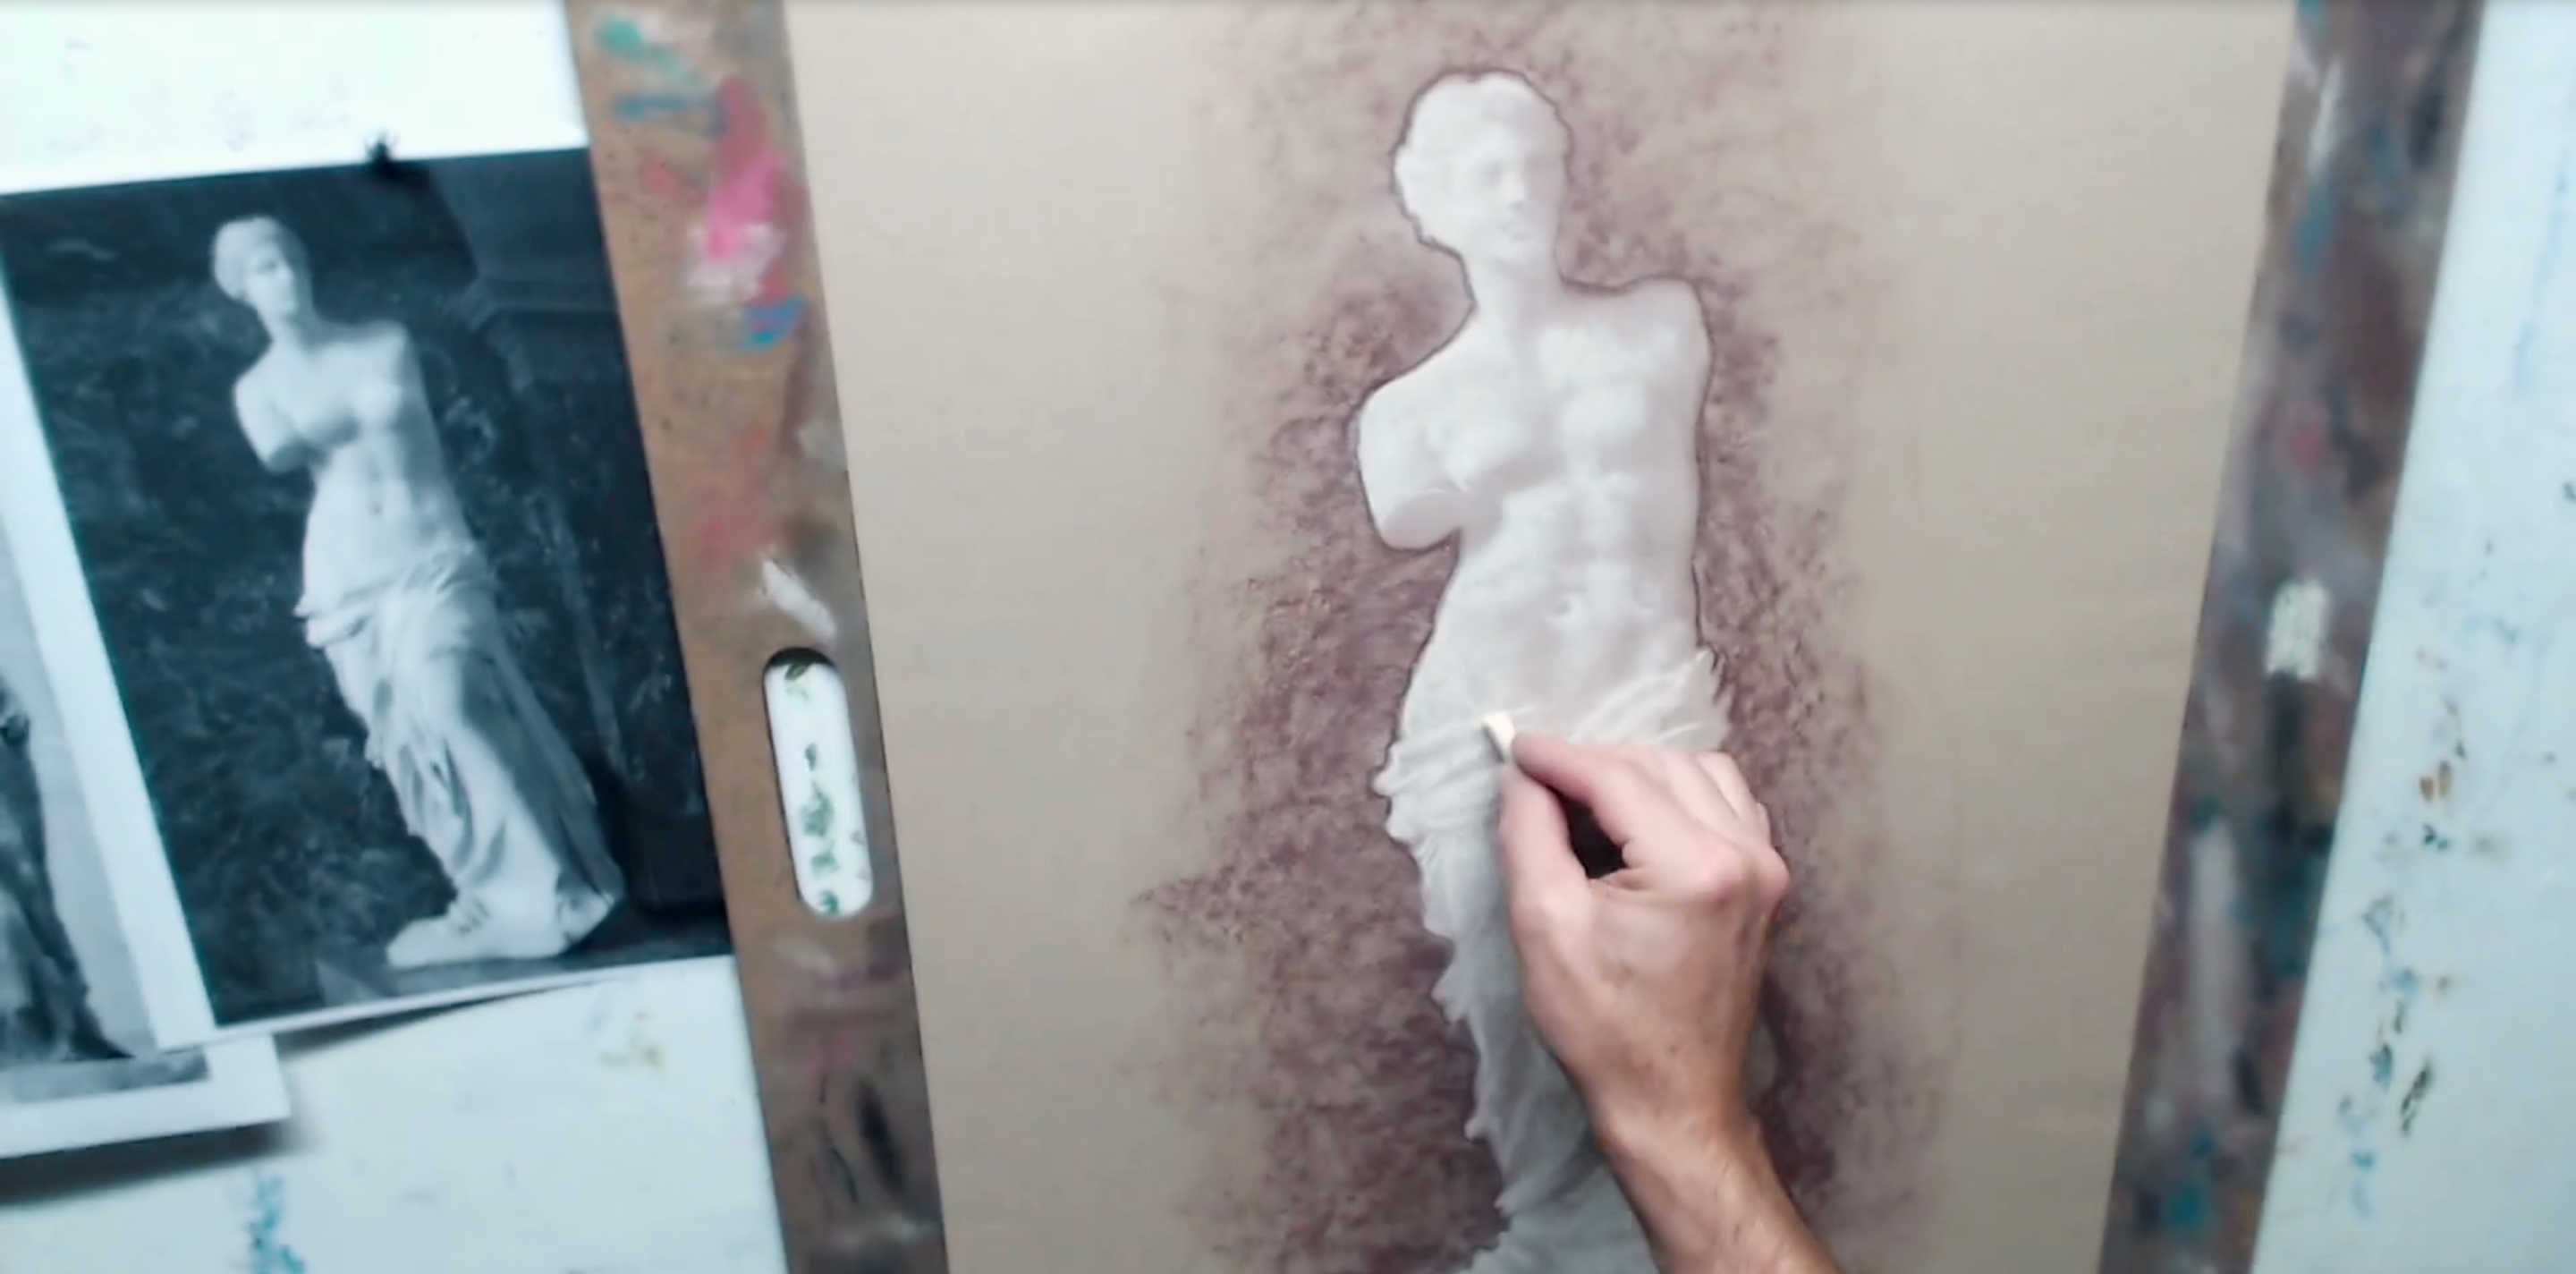 A person drawing a figure, focusing on the fundamentals of figure drawing, applying the various elements of the human body